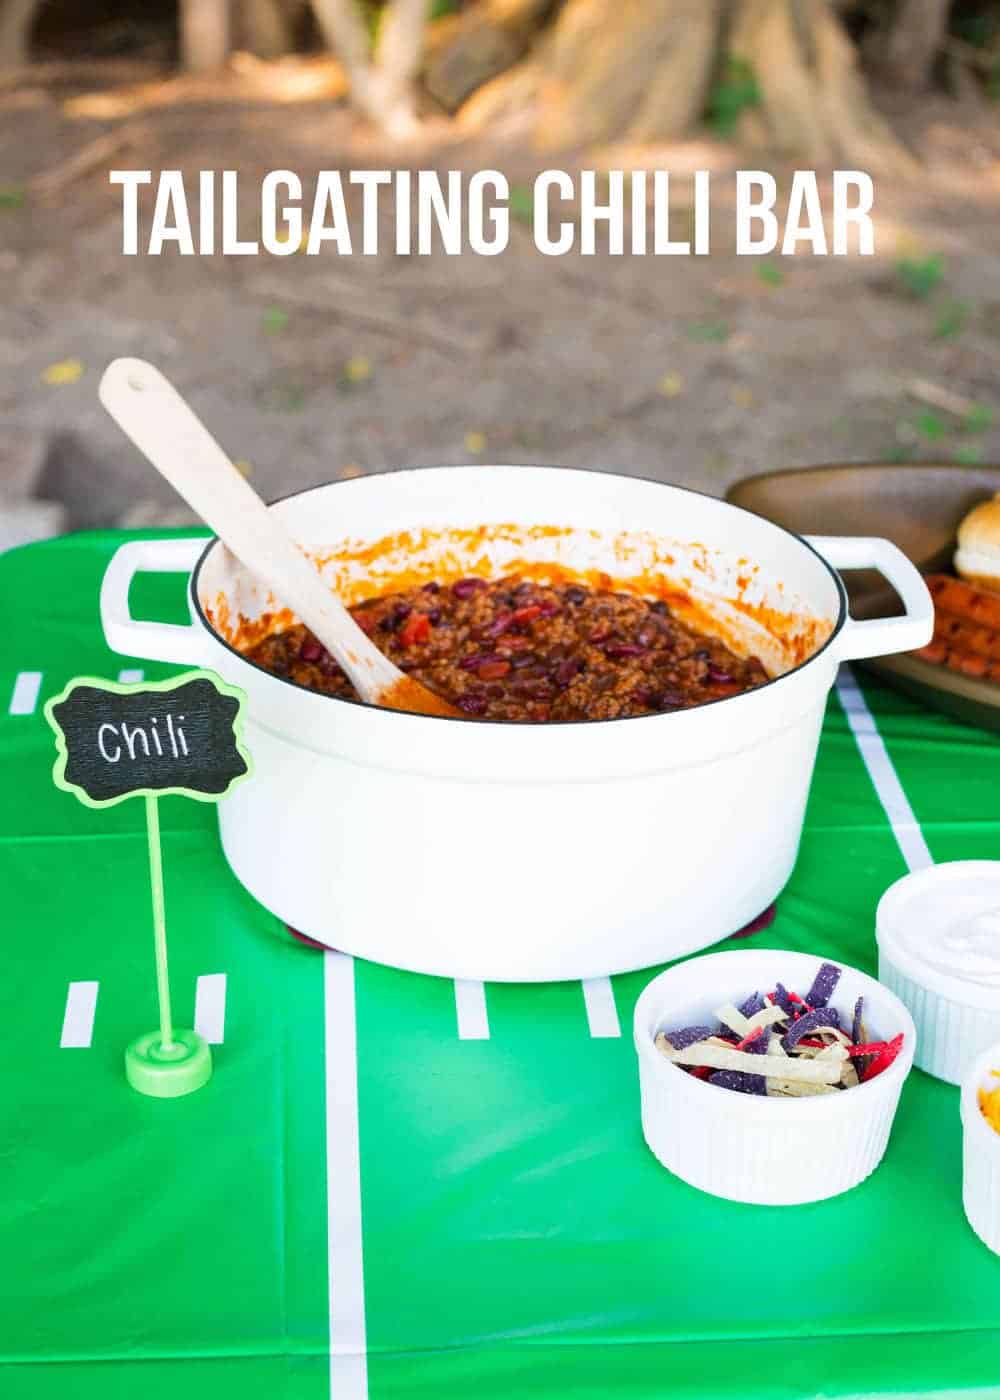 Tailgating chili bar with a pot of homemade chili.